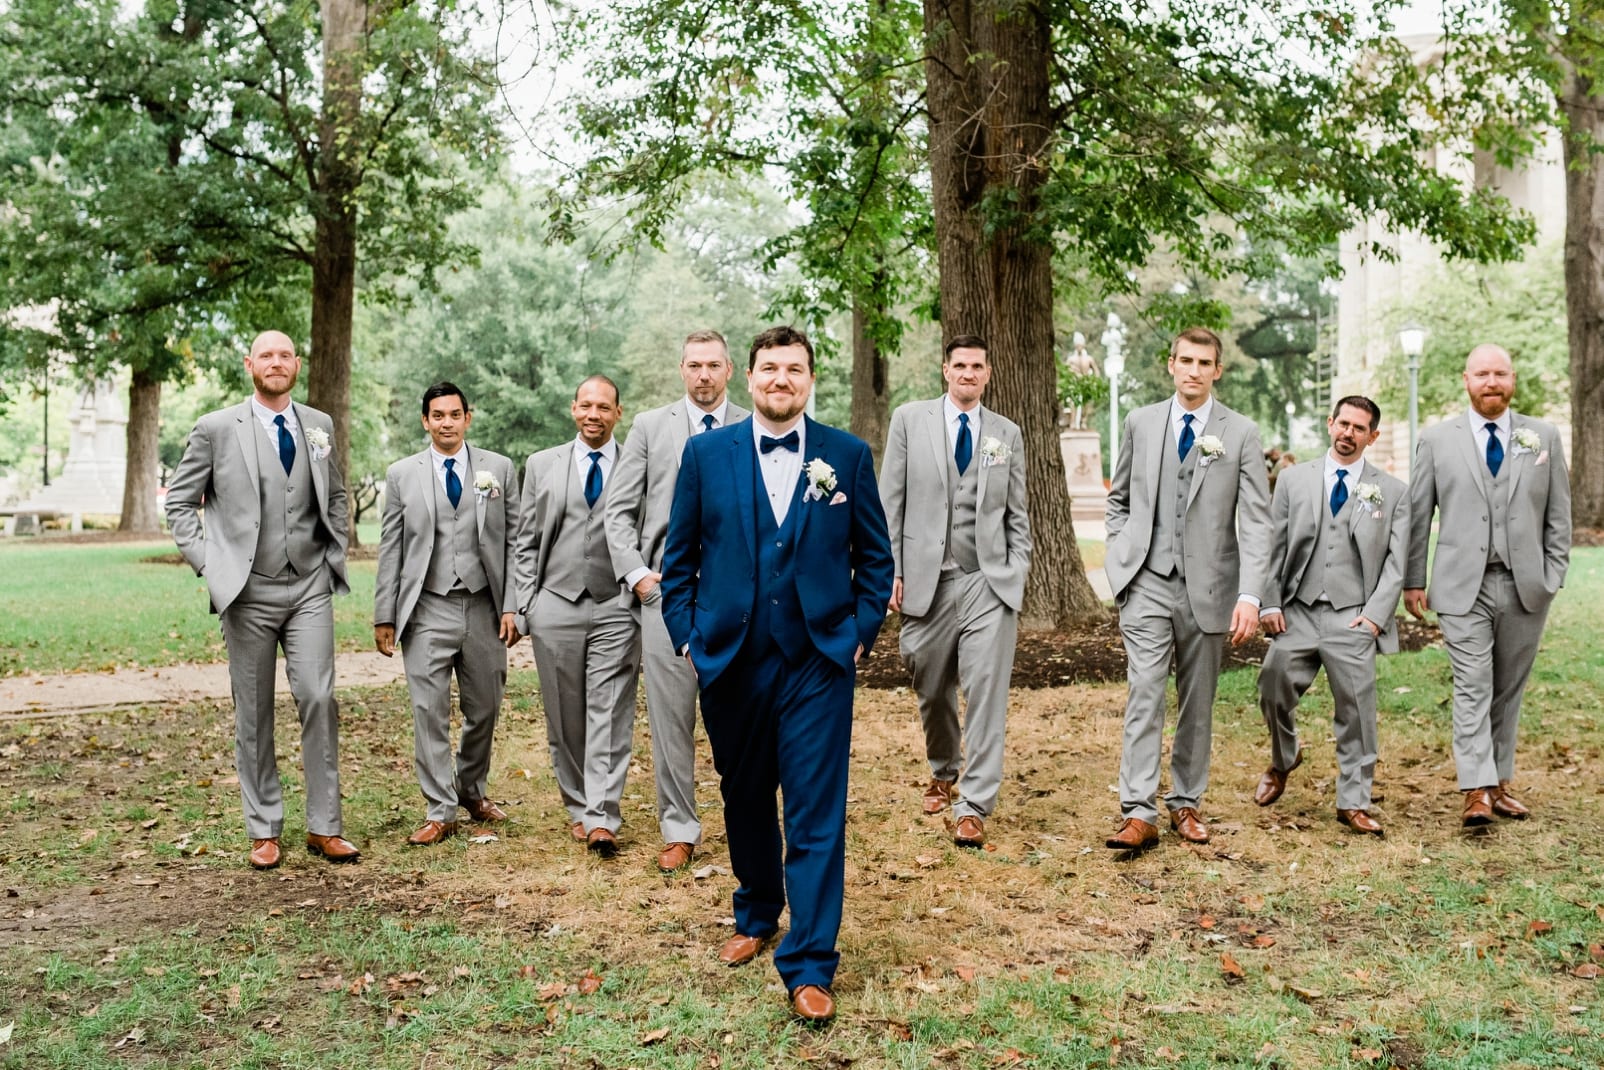 Raleigh Capital grounds groom in navy blue tux walking in front of his groomsmen in gray suits photo